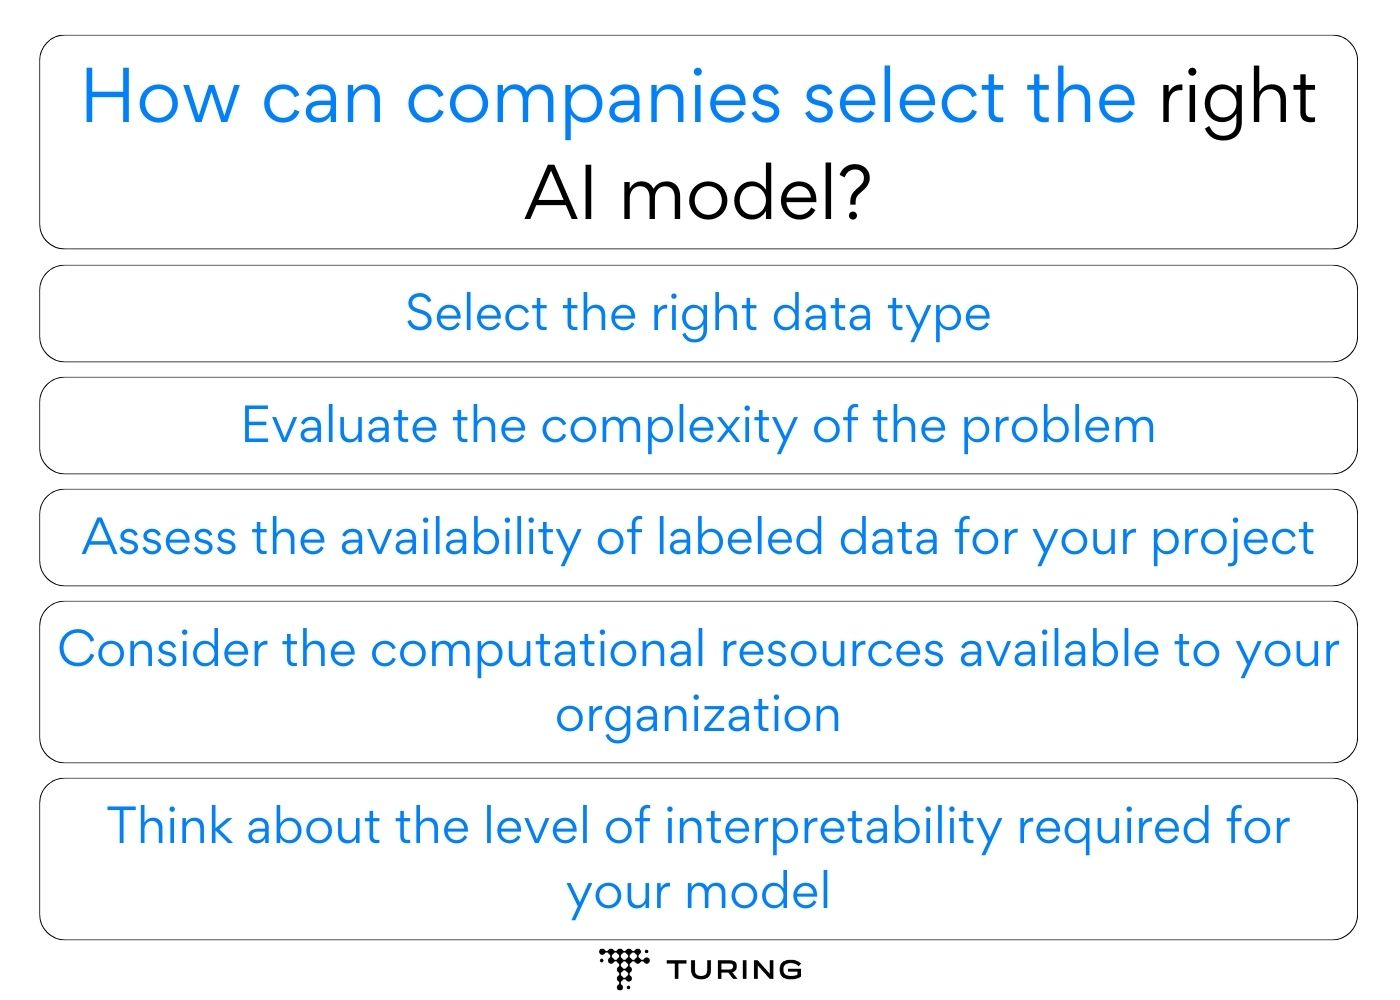 How can companies select the right AI model?